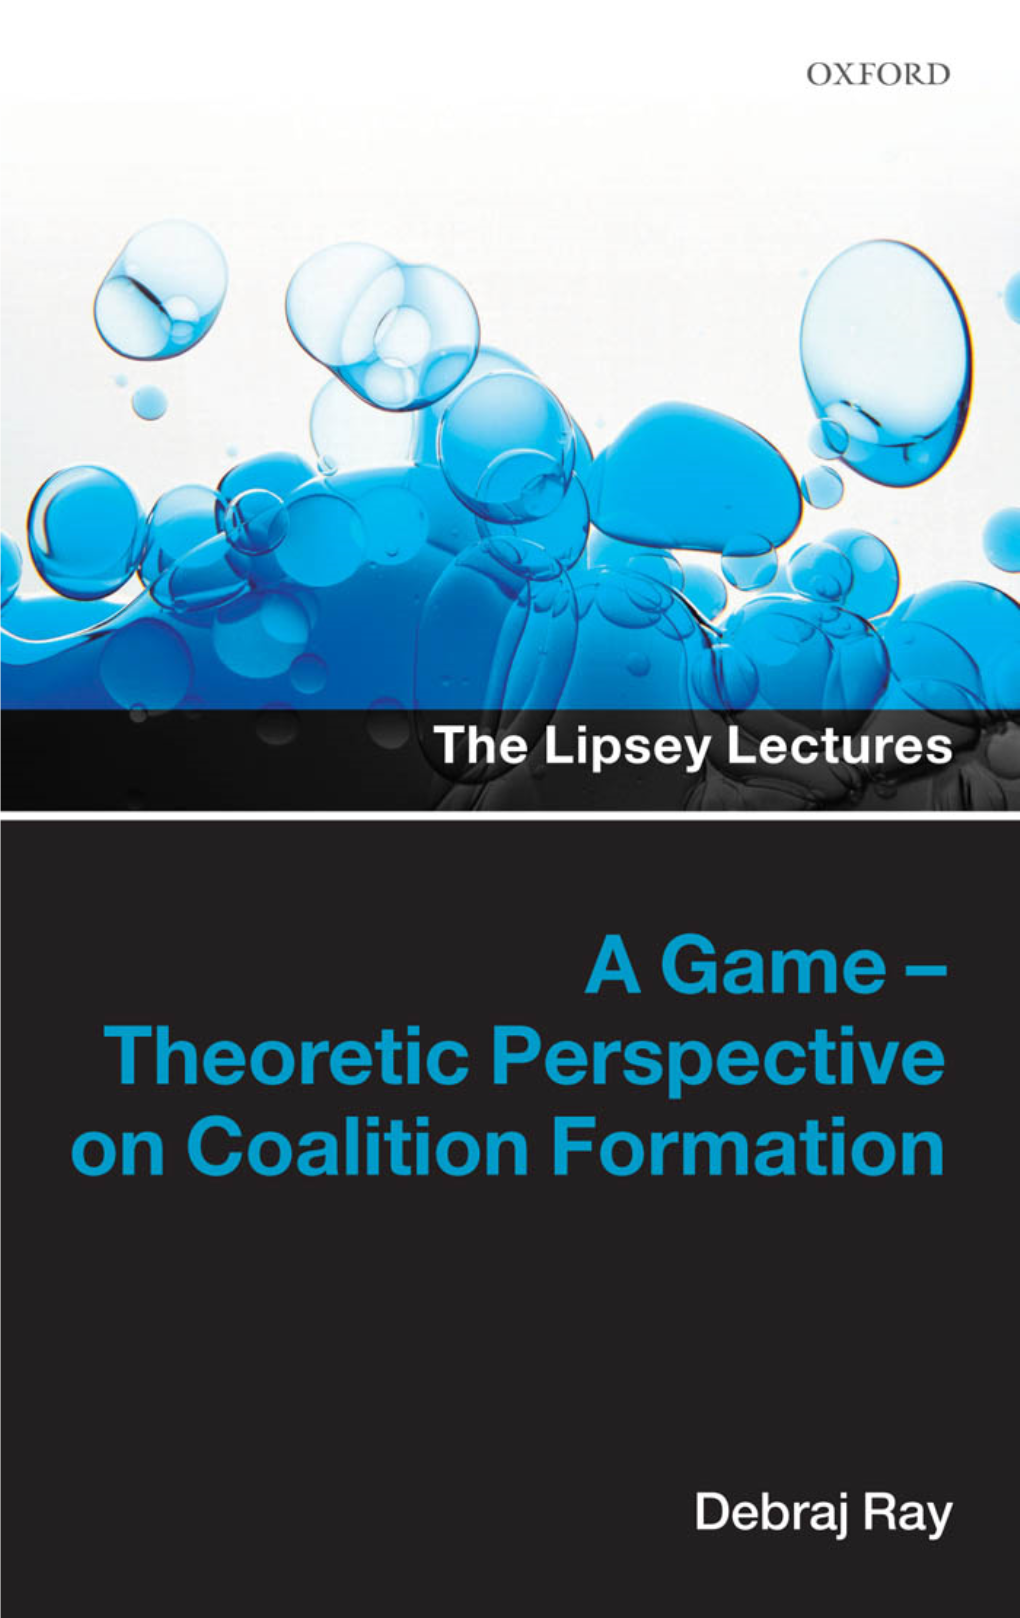 A Game-Theoretic Perspective on Coalition Formation the Lipsey Lectures